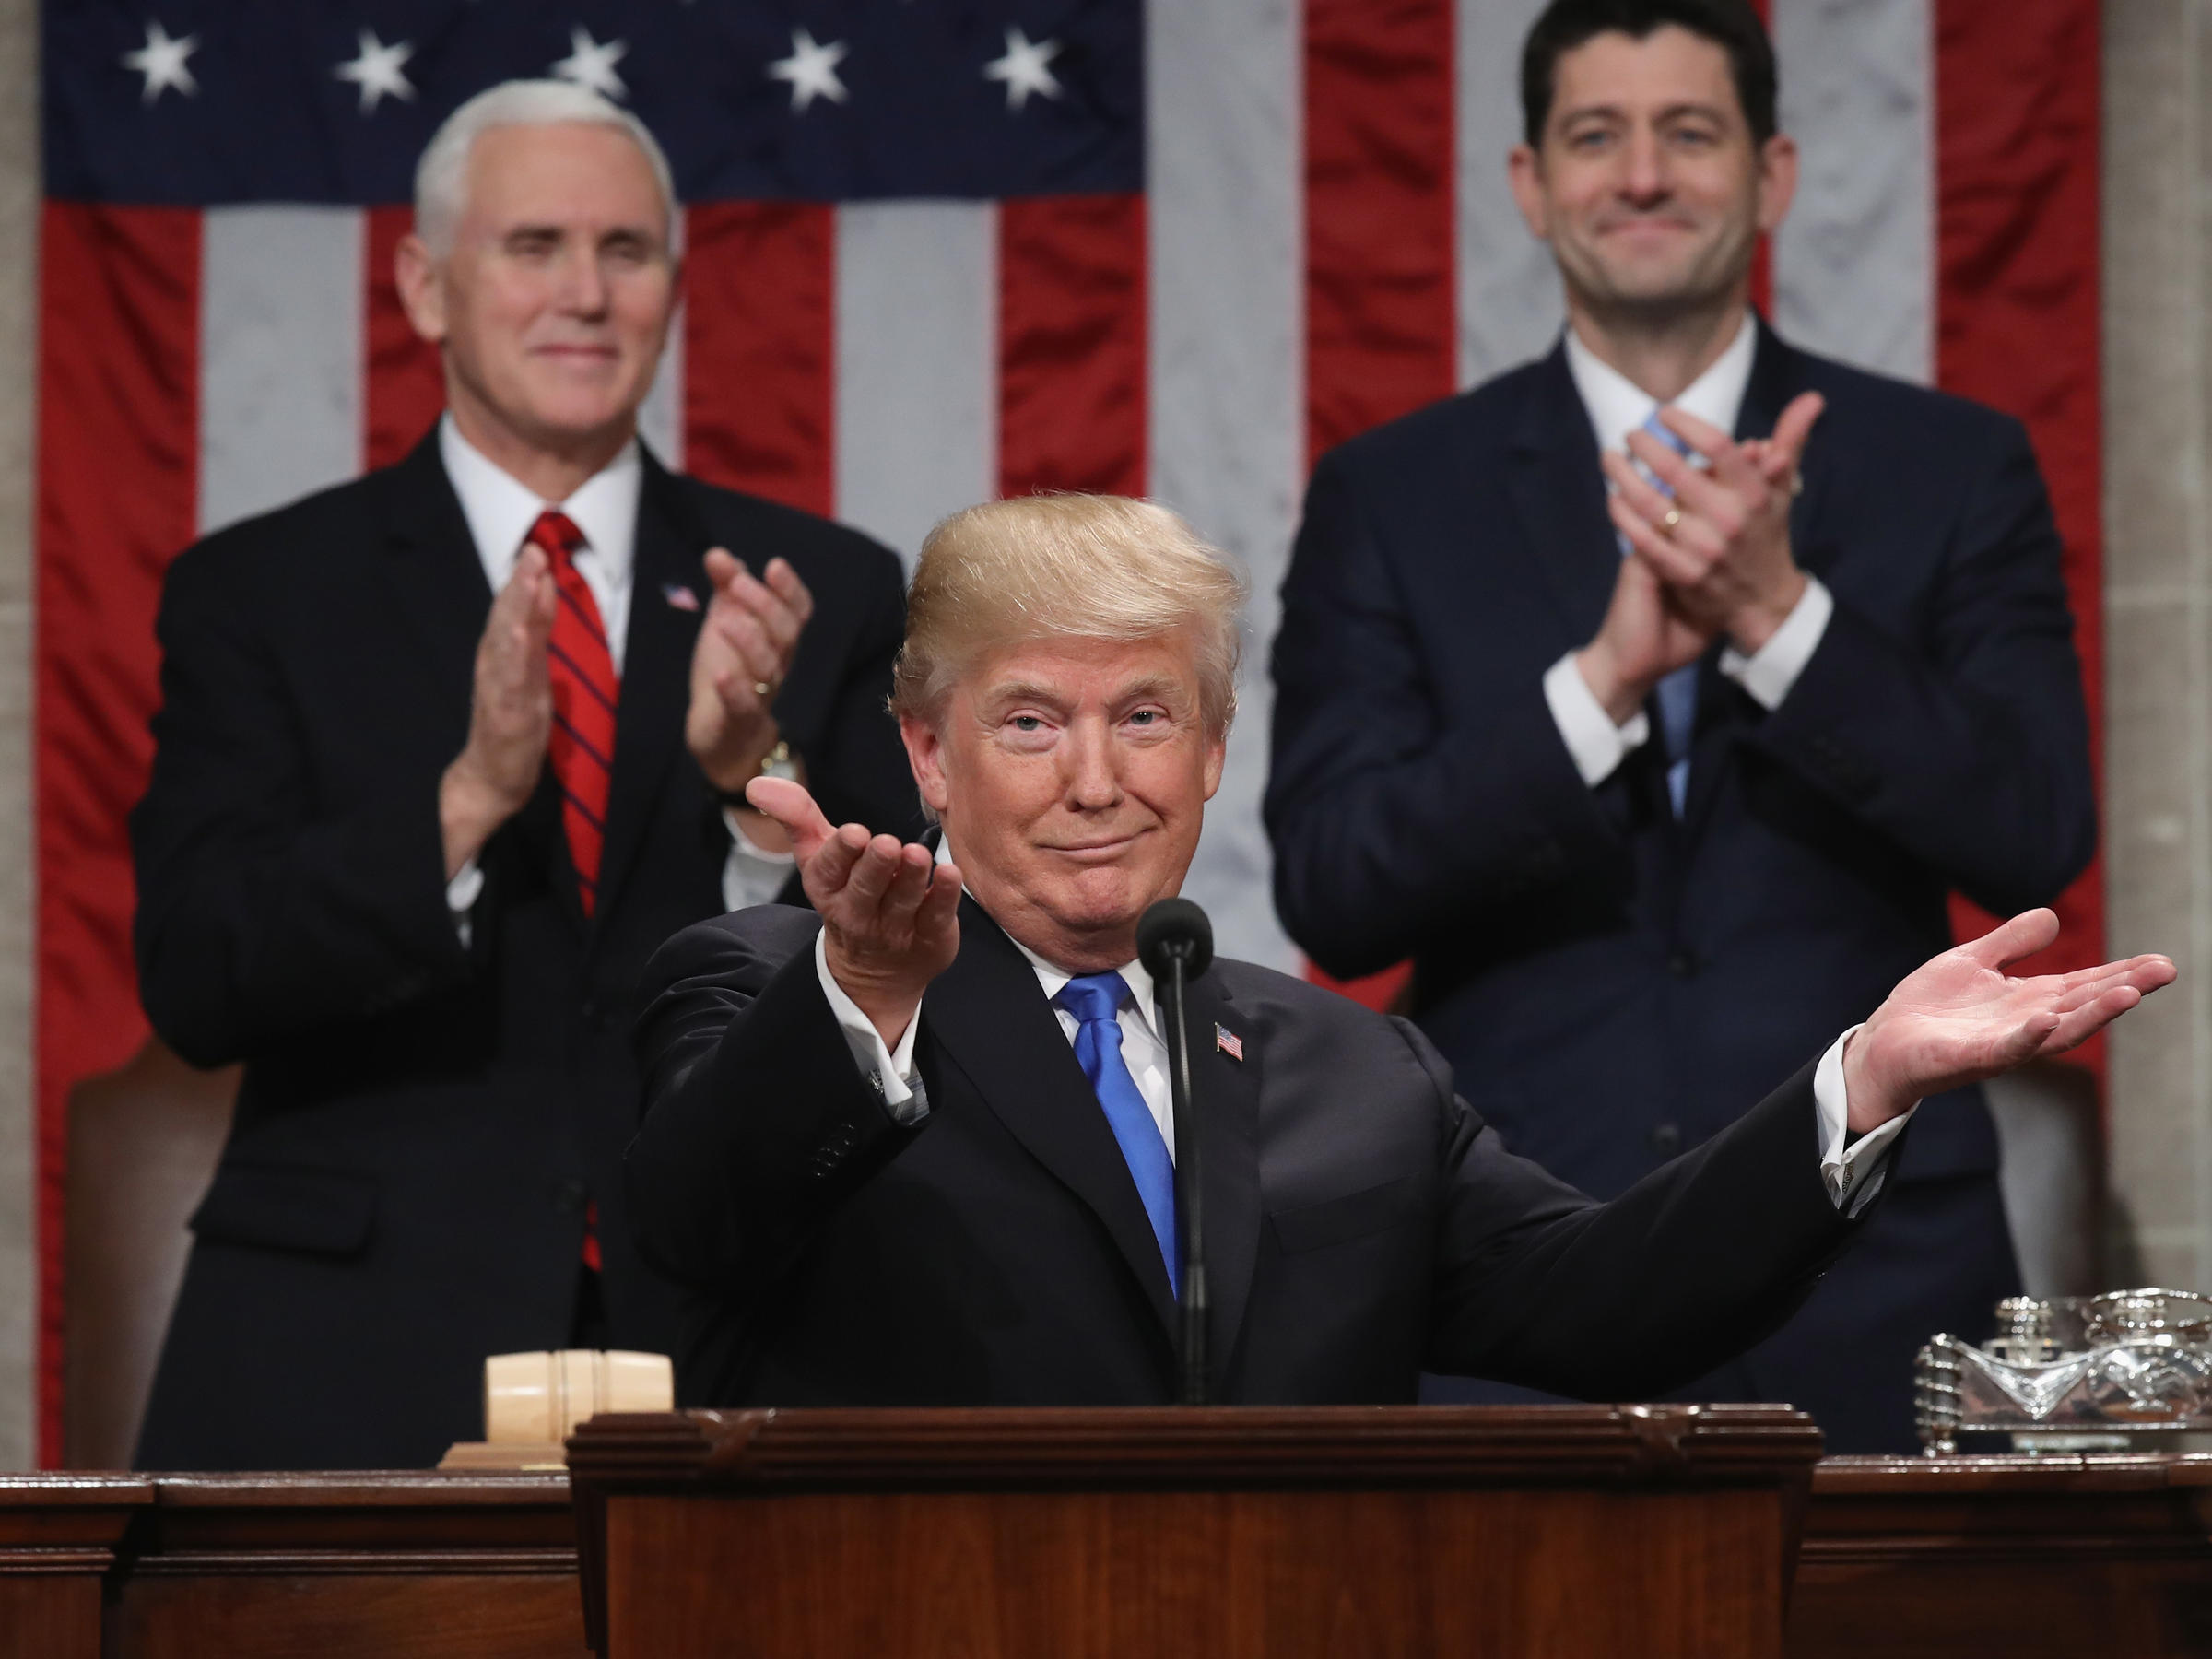 Trump Claims His SOTU Had The Highest Ratings In History. It Didn't